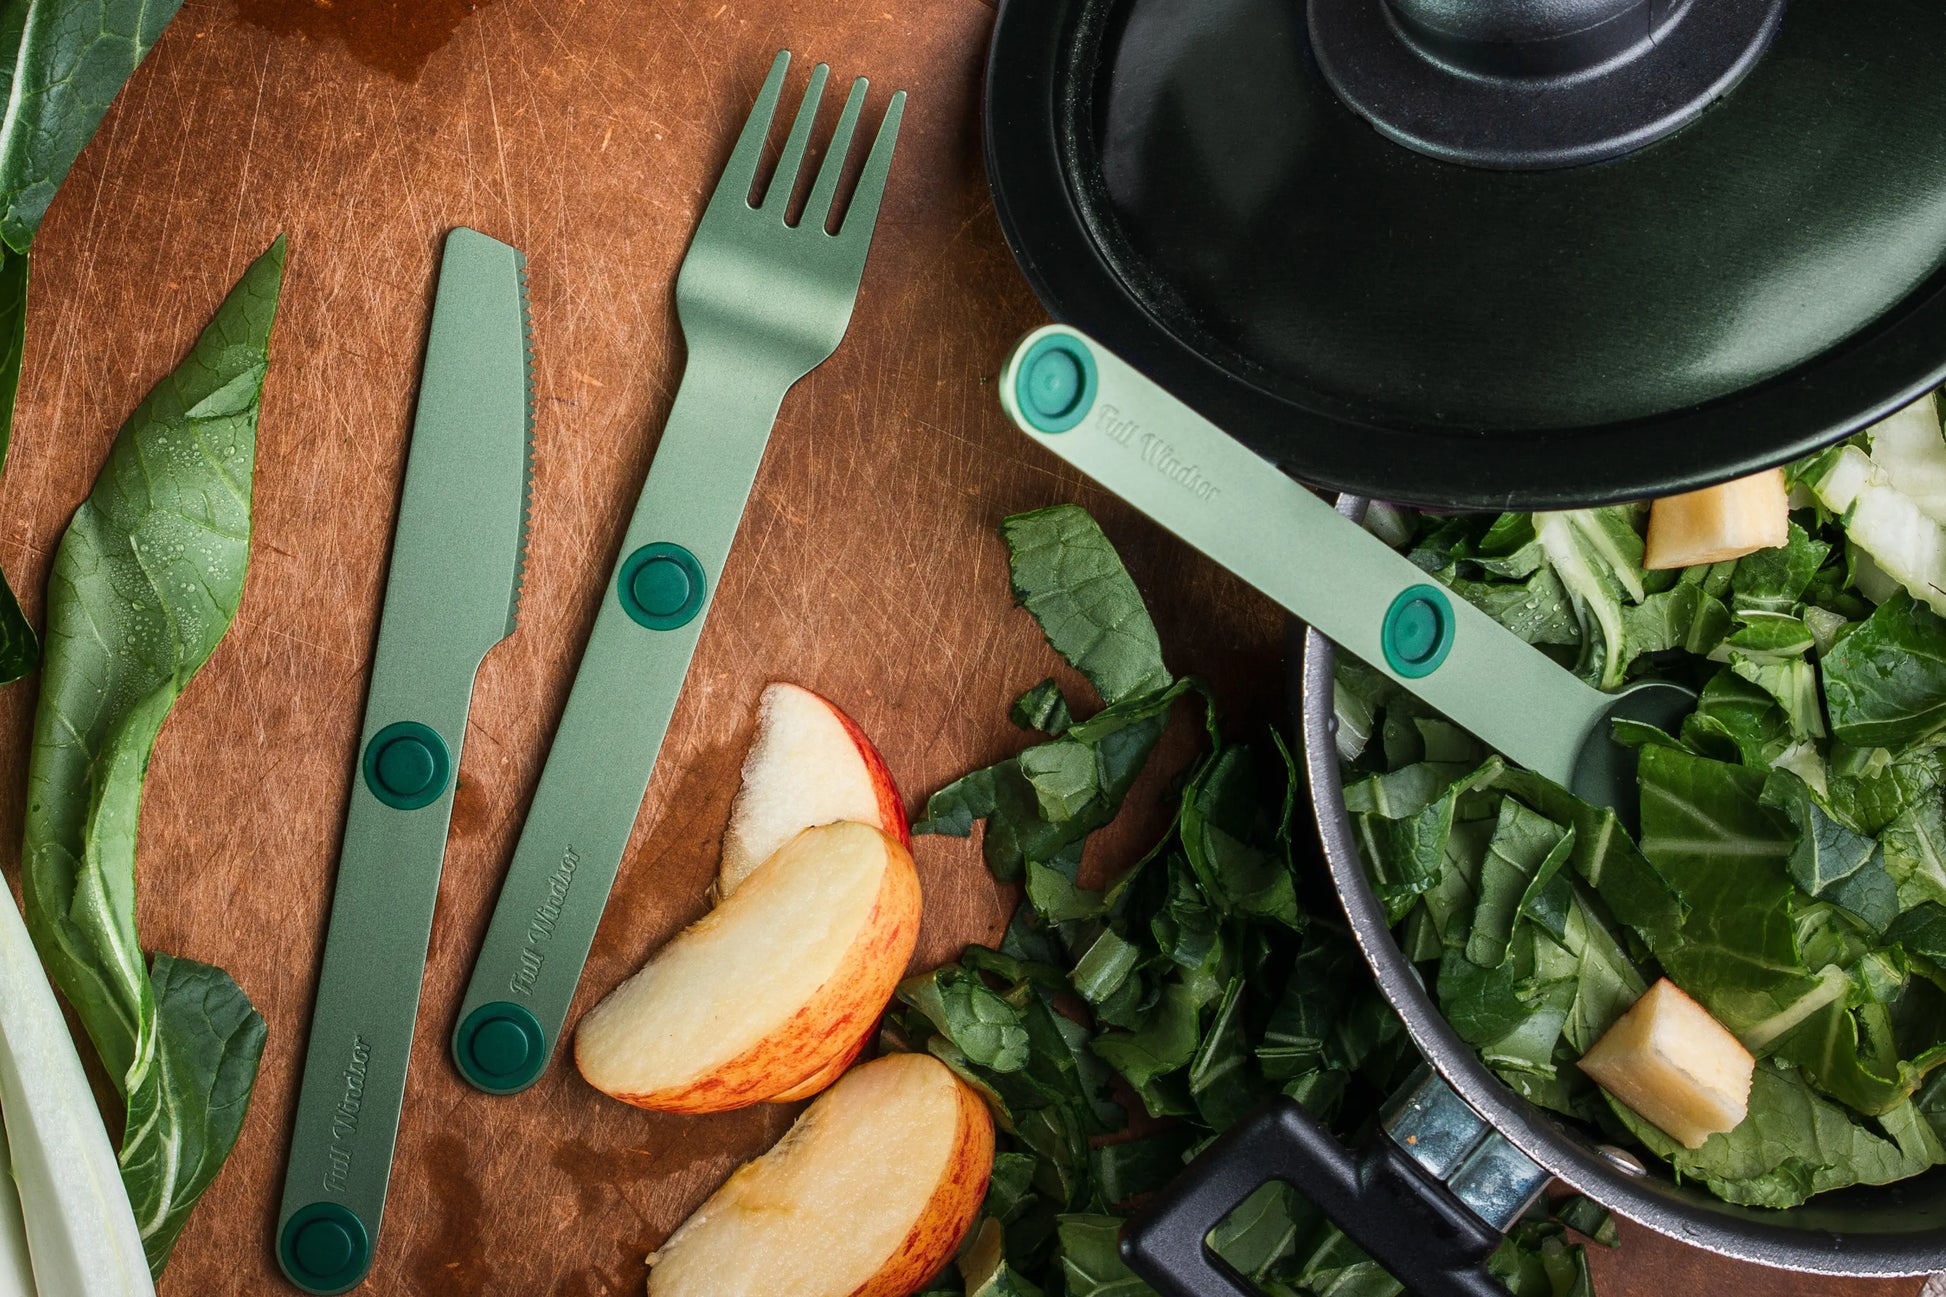 Green fork, knife and spoon with salad and apple slices.